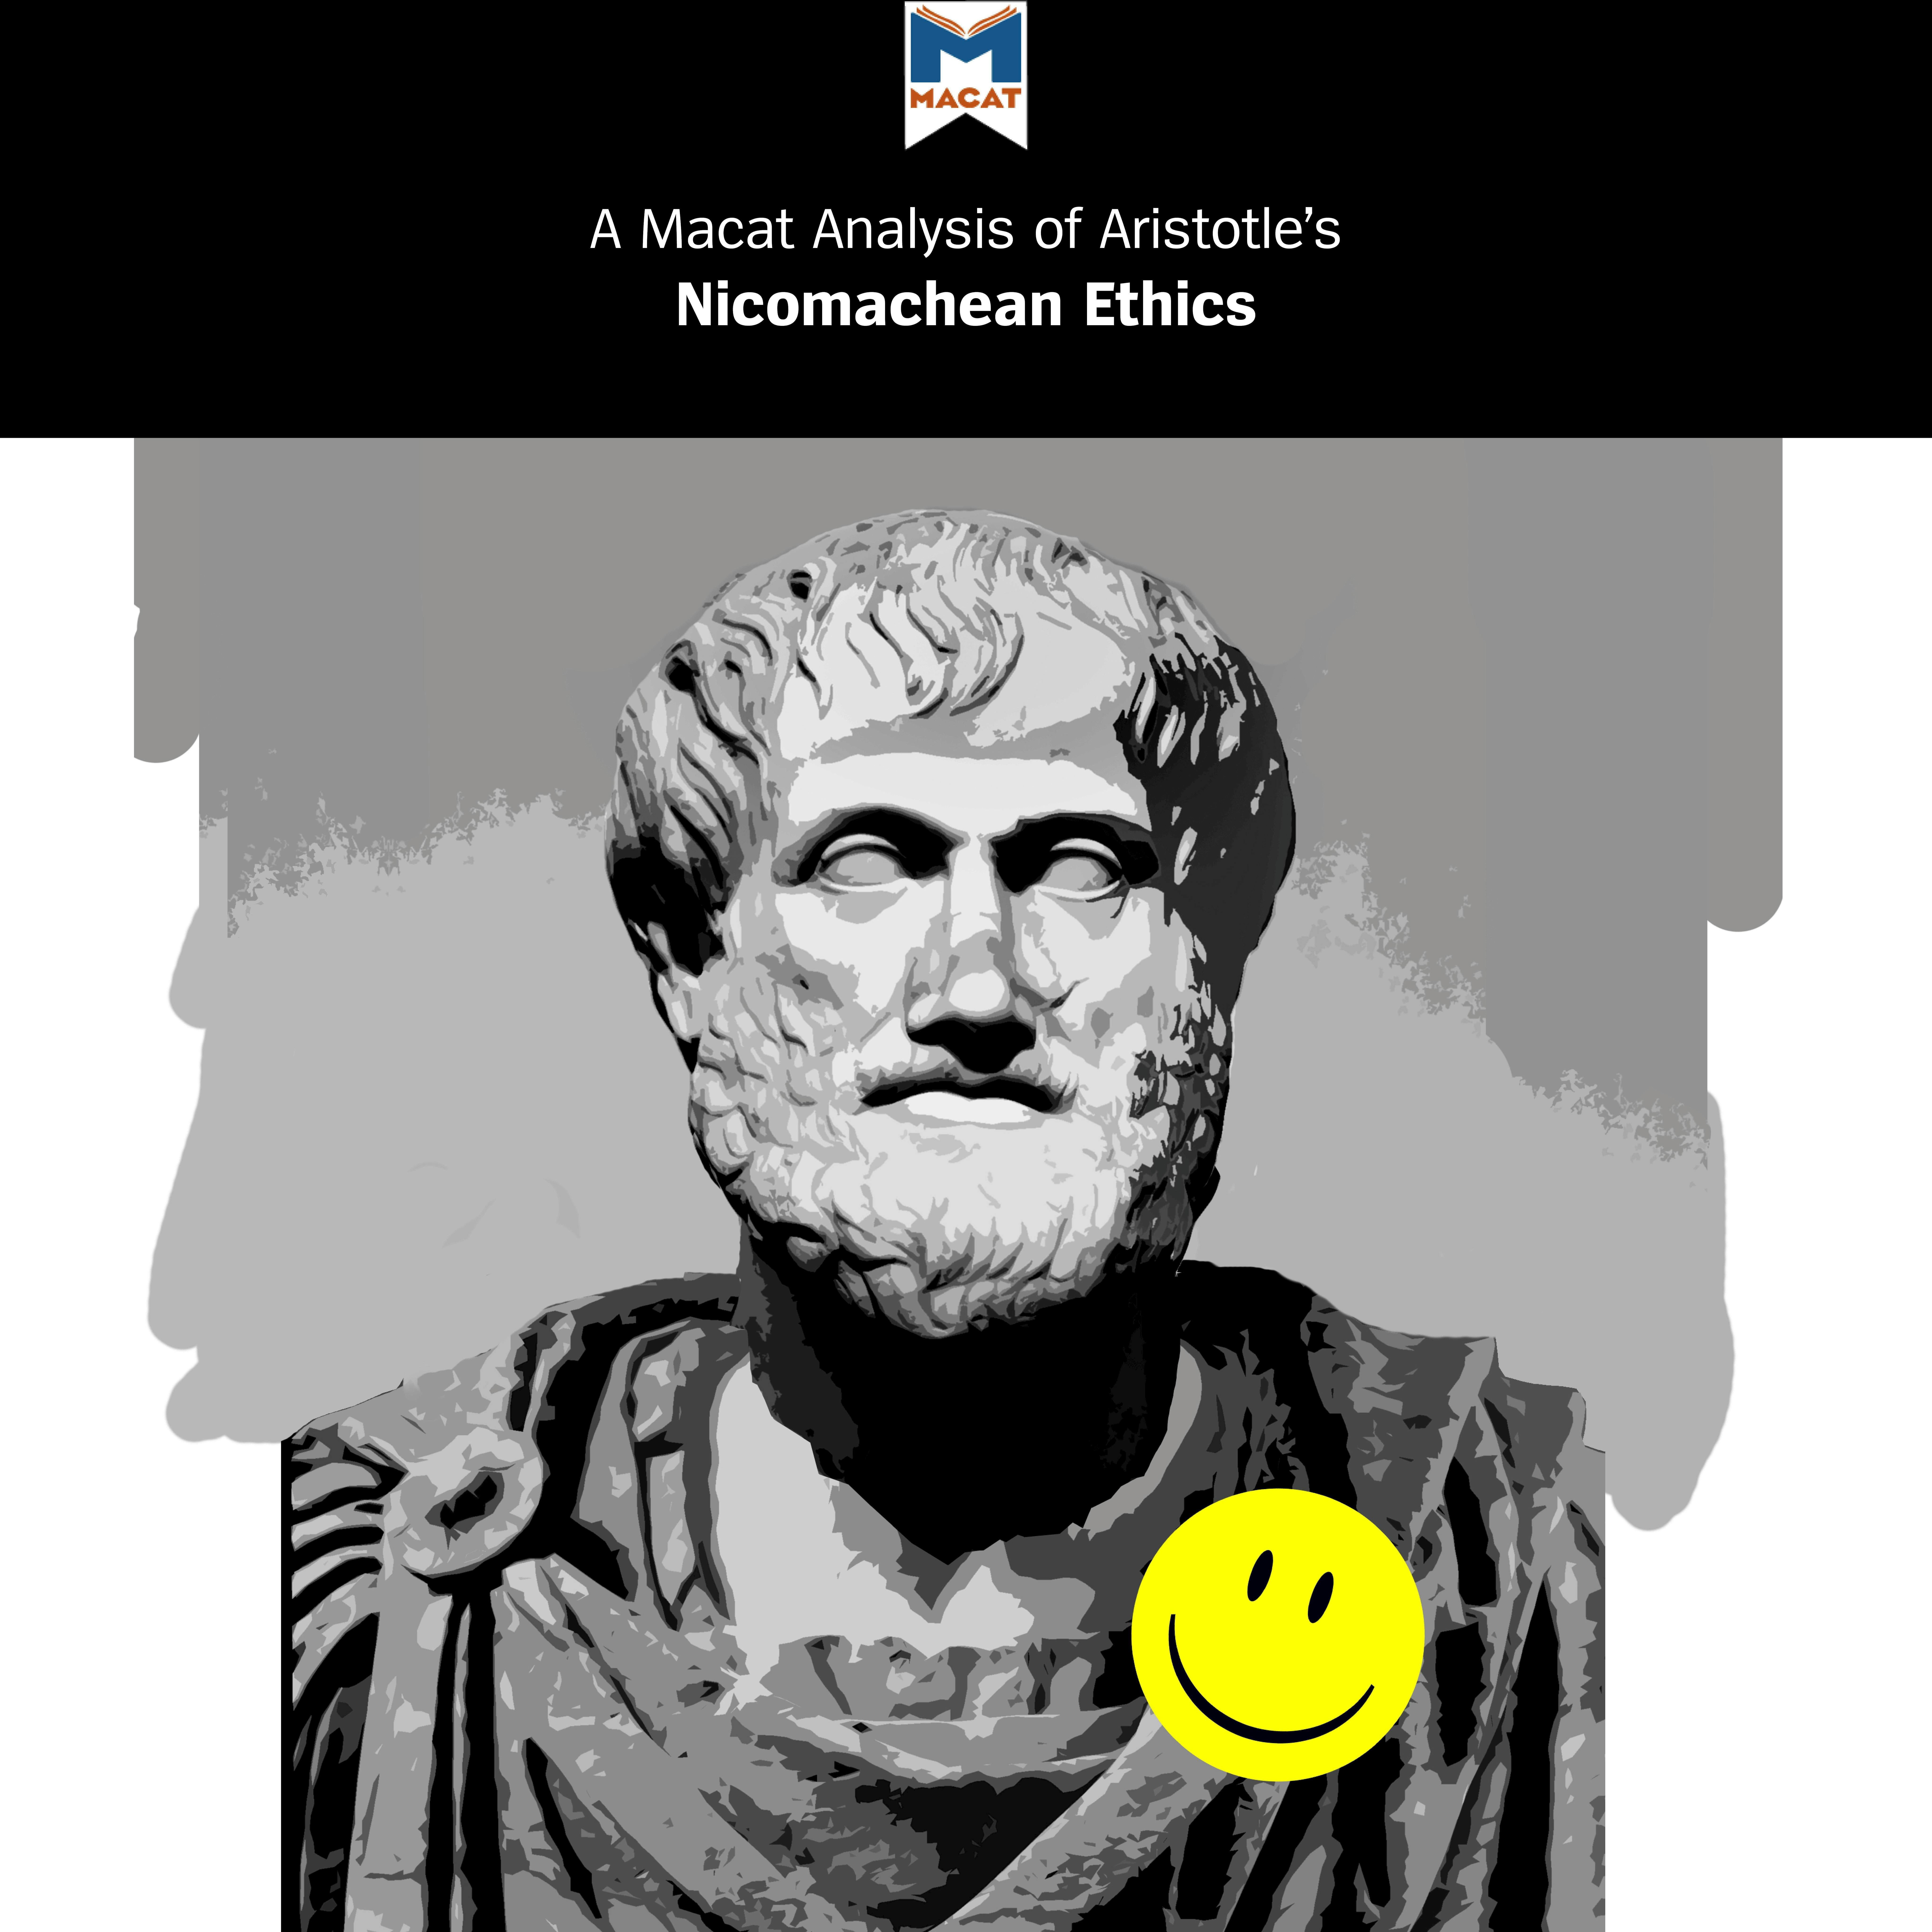 A Macat Analysis of Aristotle's Nicomachean Ethics - undefined